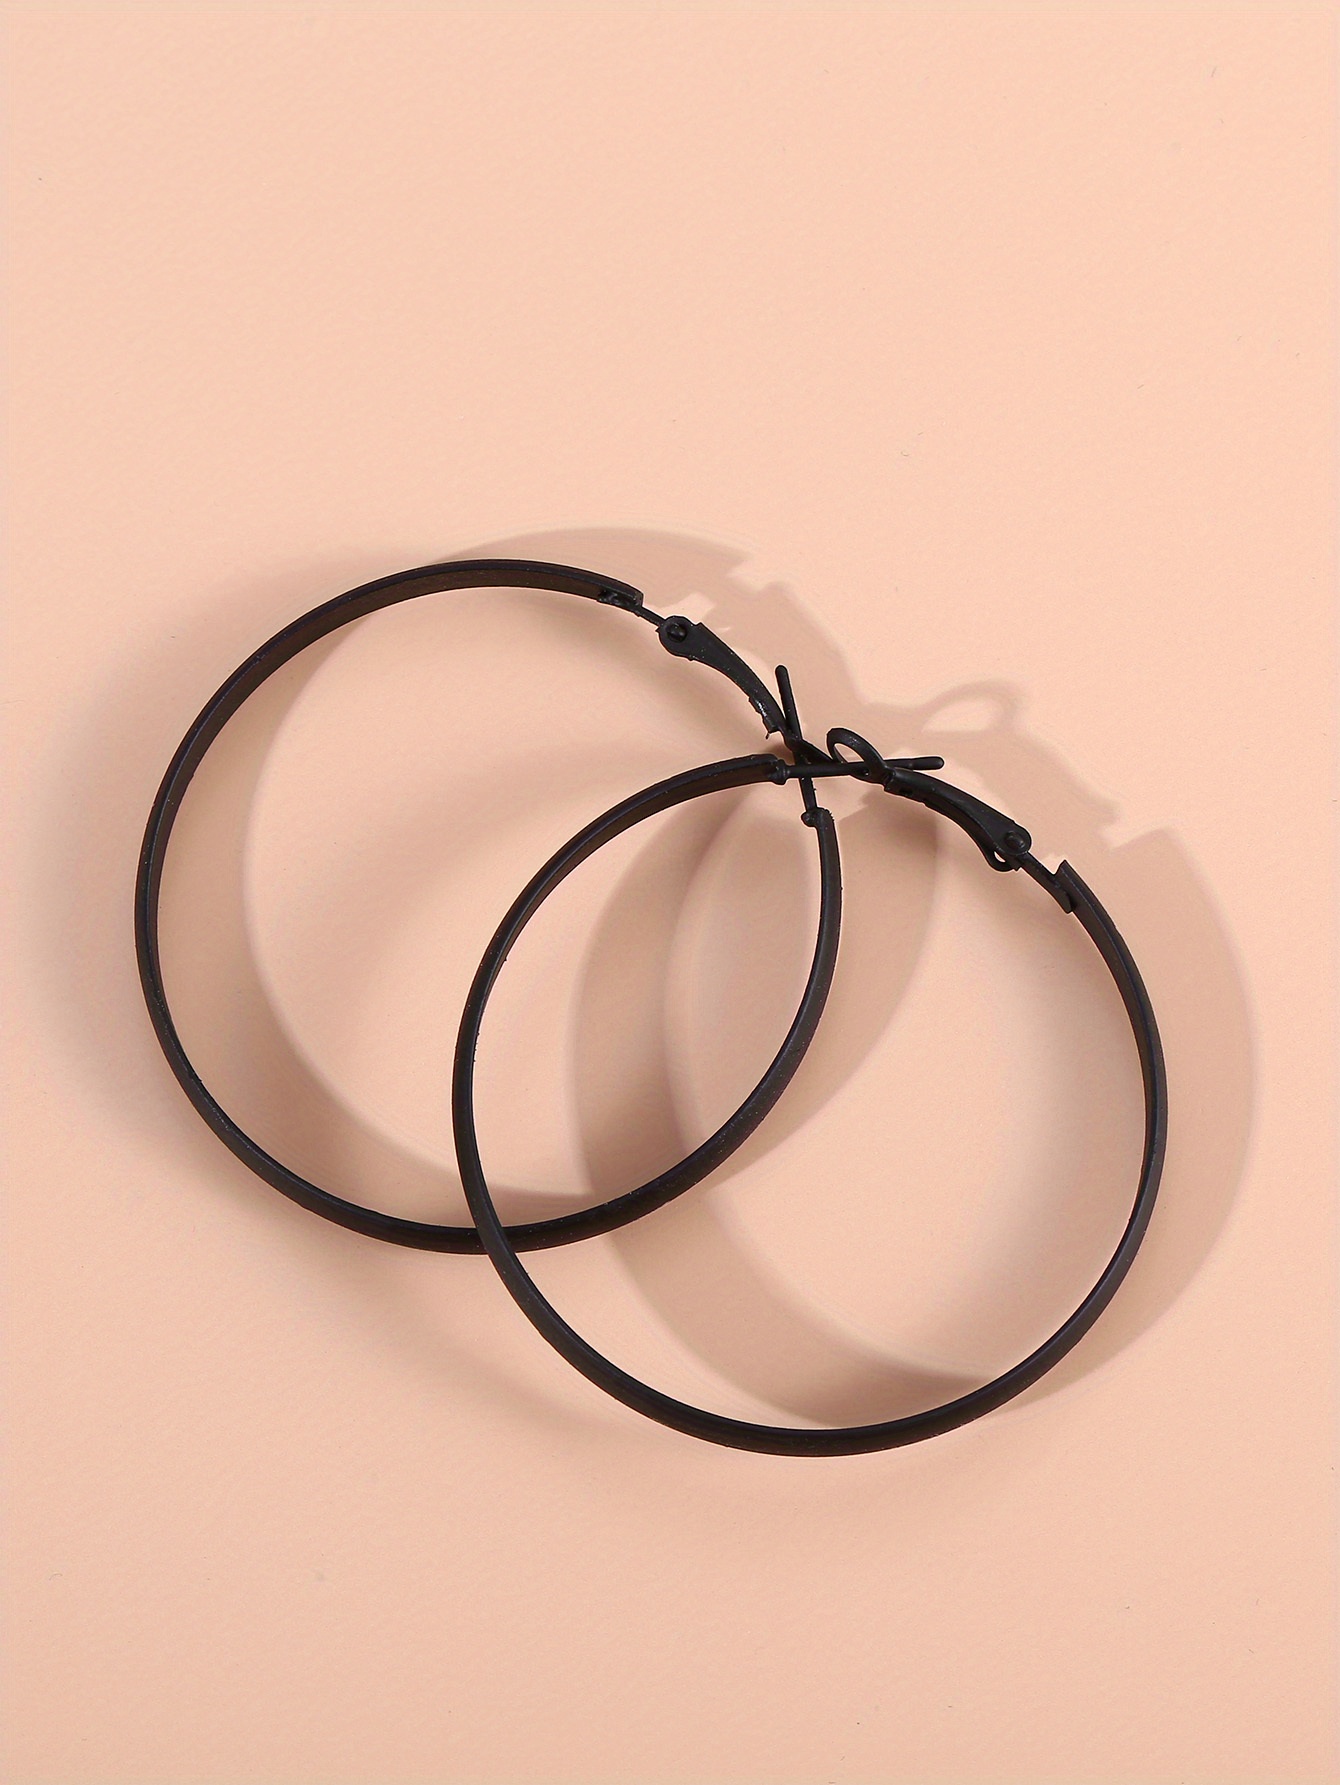 Simple Hoop Bangle Bracelets With Charms Earrings For Women